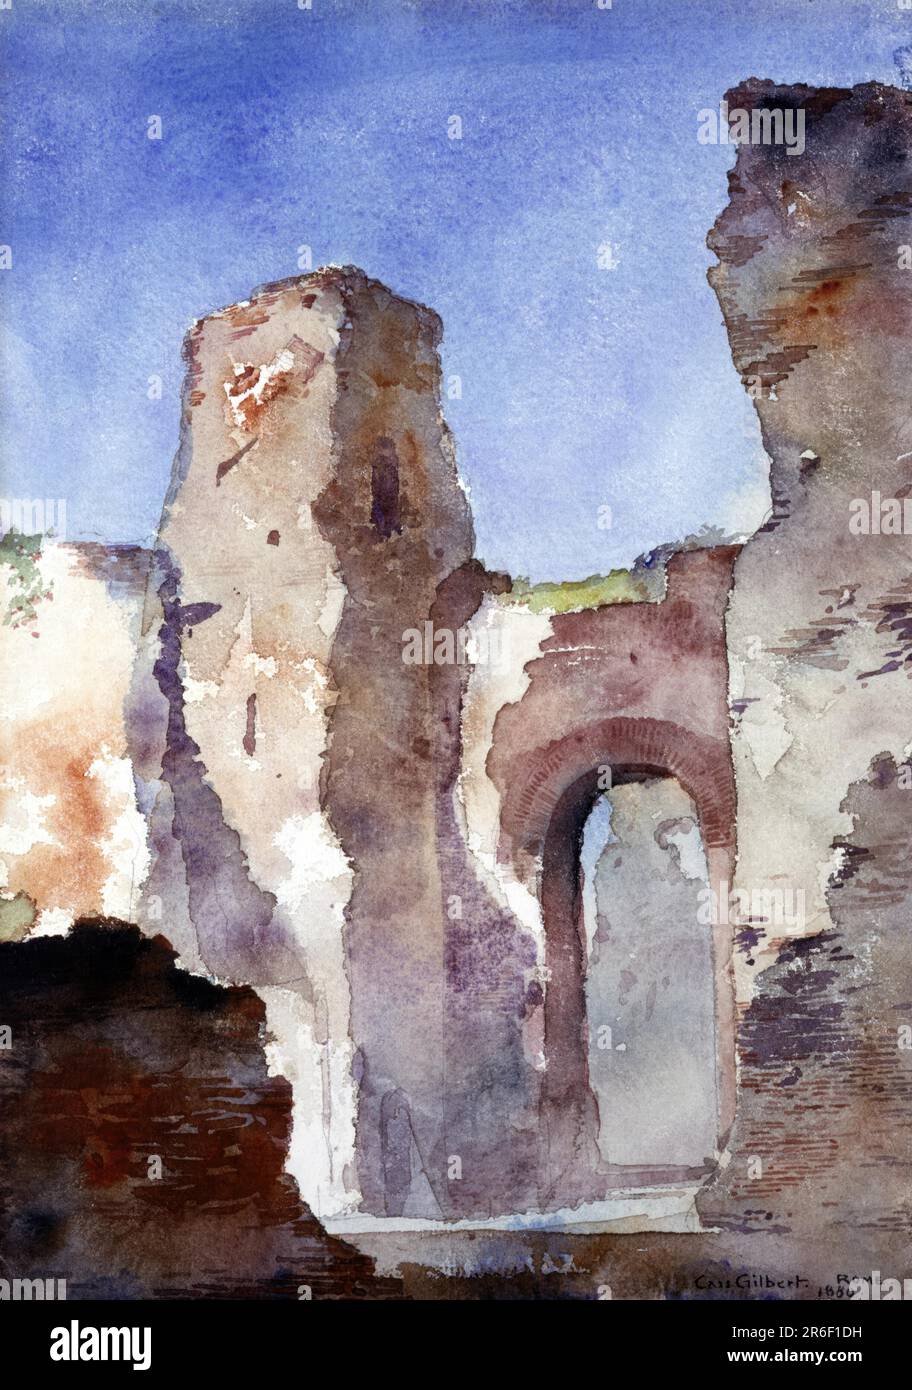 Baths of Caracalla, Rome. watercolor and pencil on paper. Date: 1880. Museum: Smithsonian American Art Museum. Stock Photo